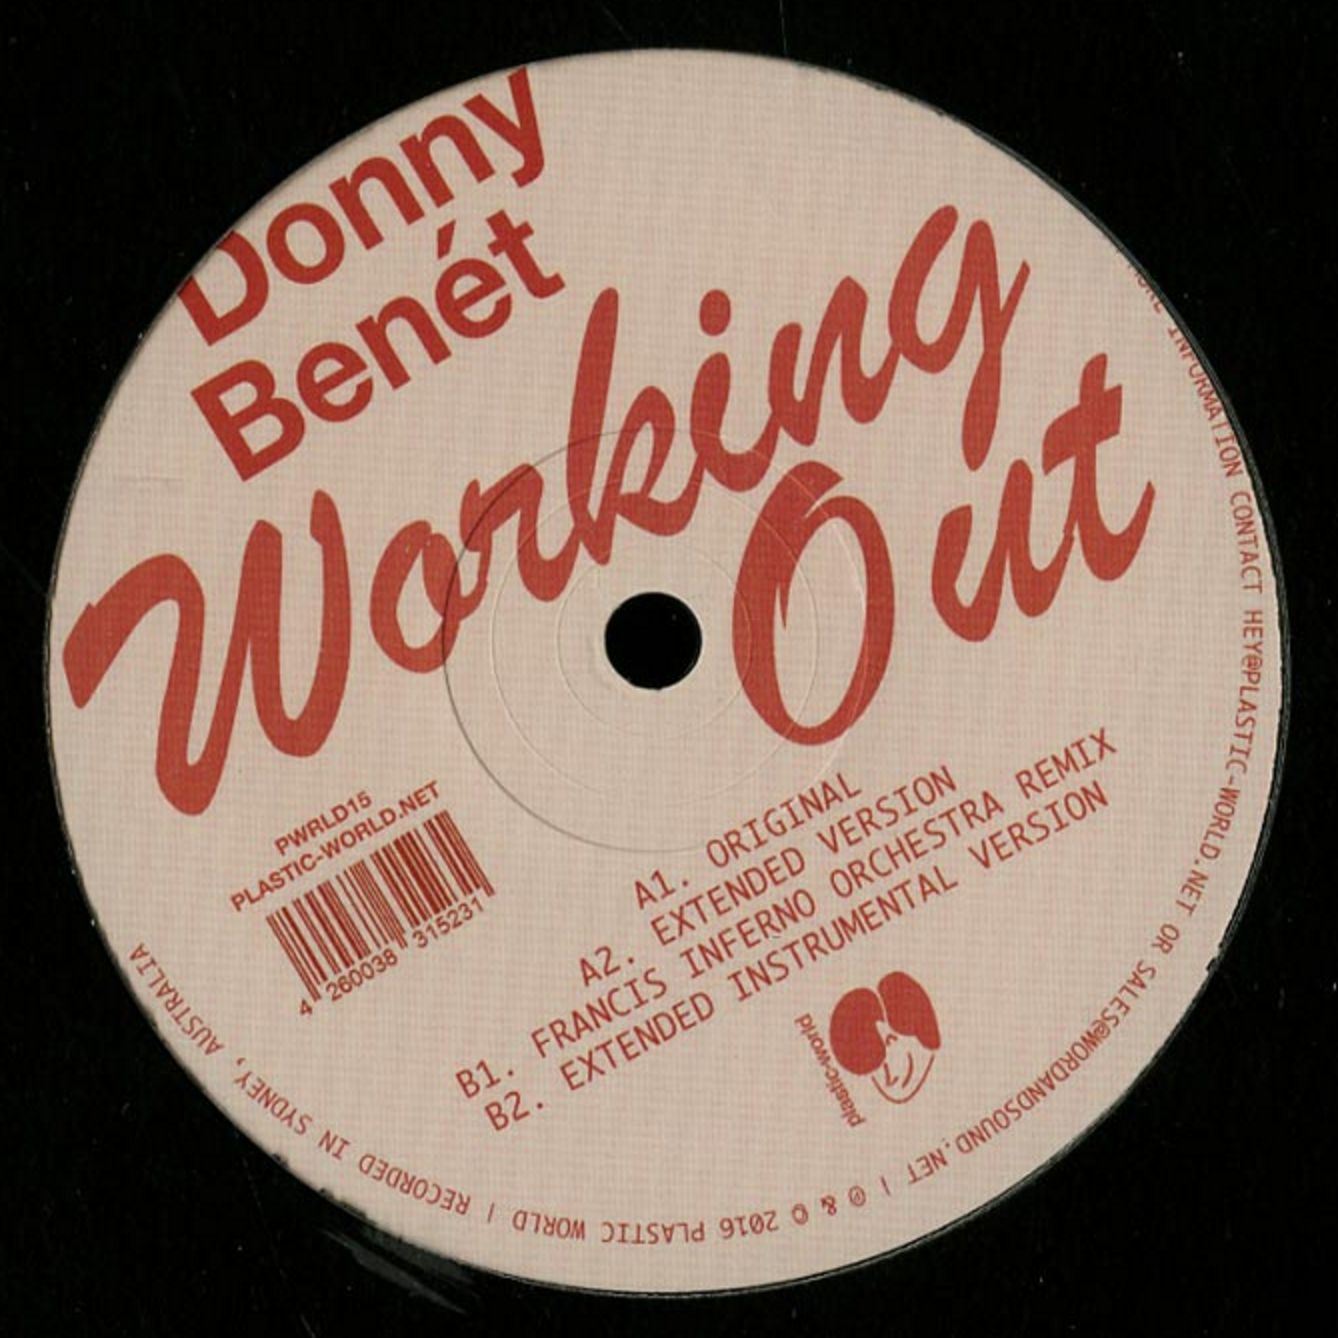 I-download Donny Benet - Working Out (FIO's Yarra Bend Reprise)